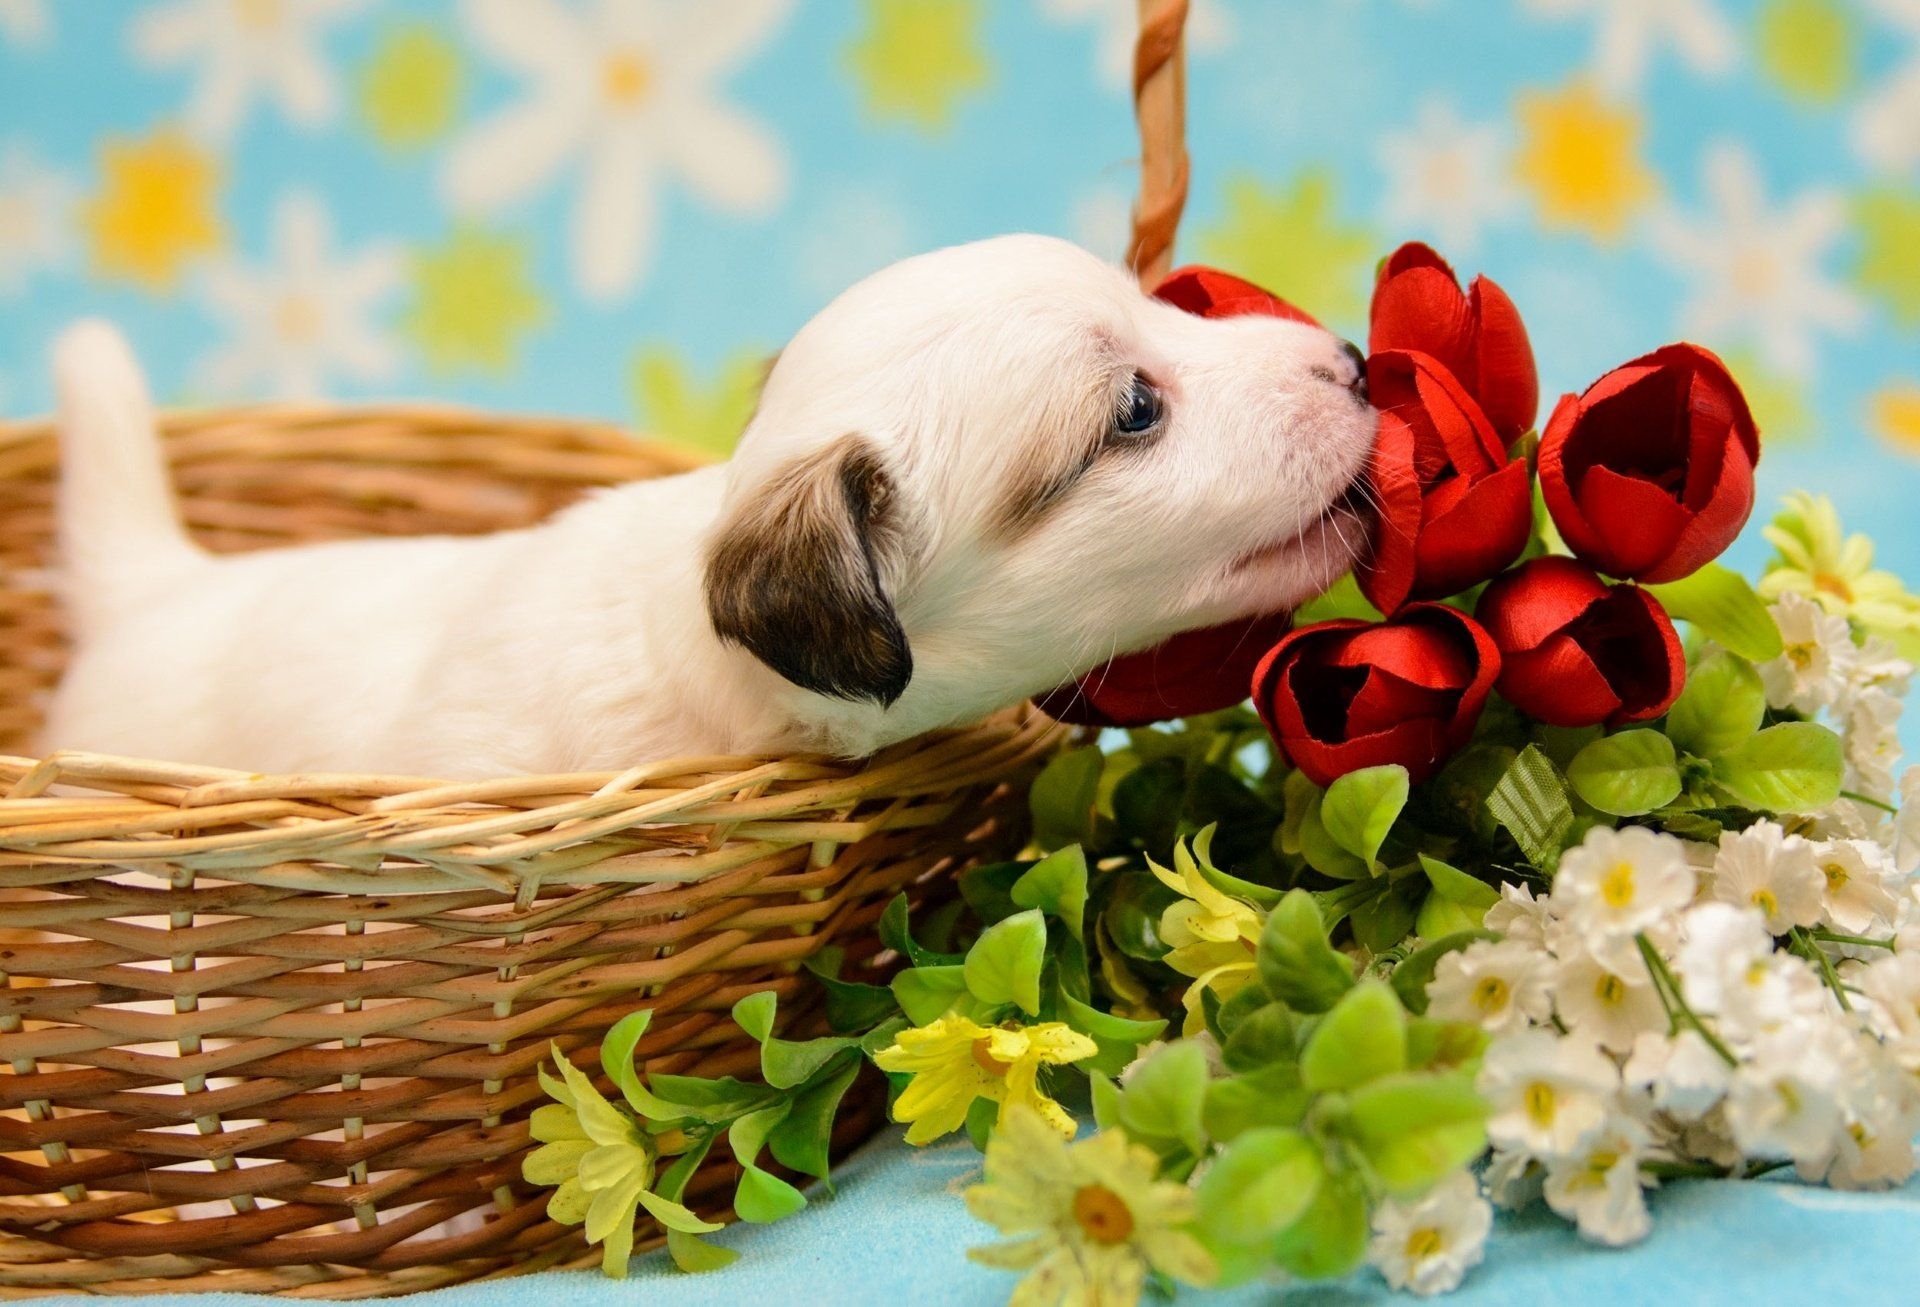 dog, Puppy, Baby, Crumb, Basket, Flowers Wallpaper HD / Desktop and Mobile Background